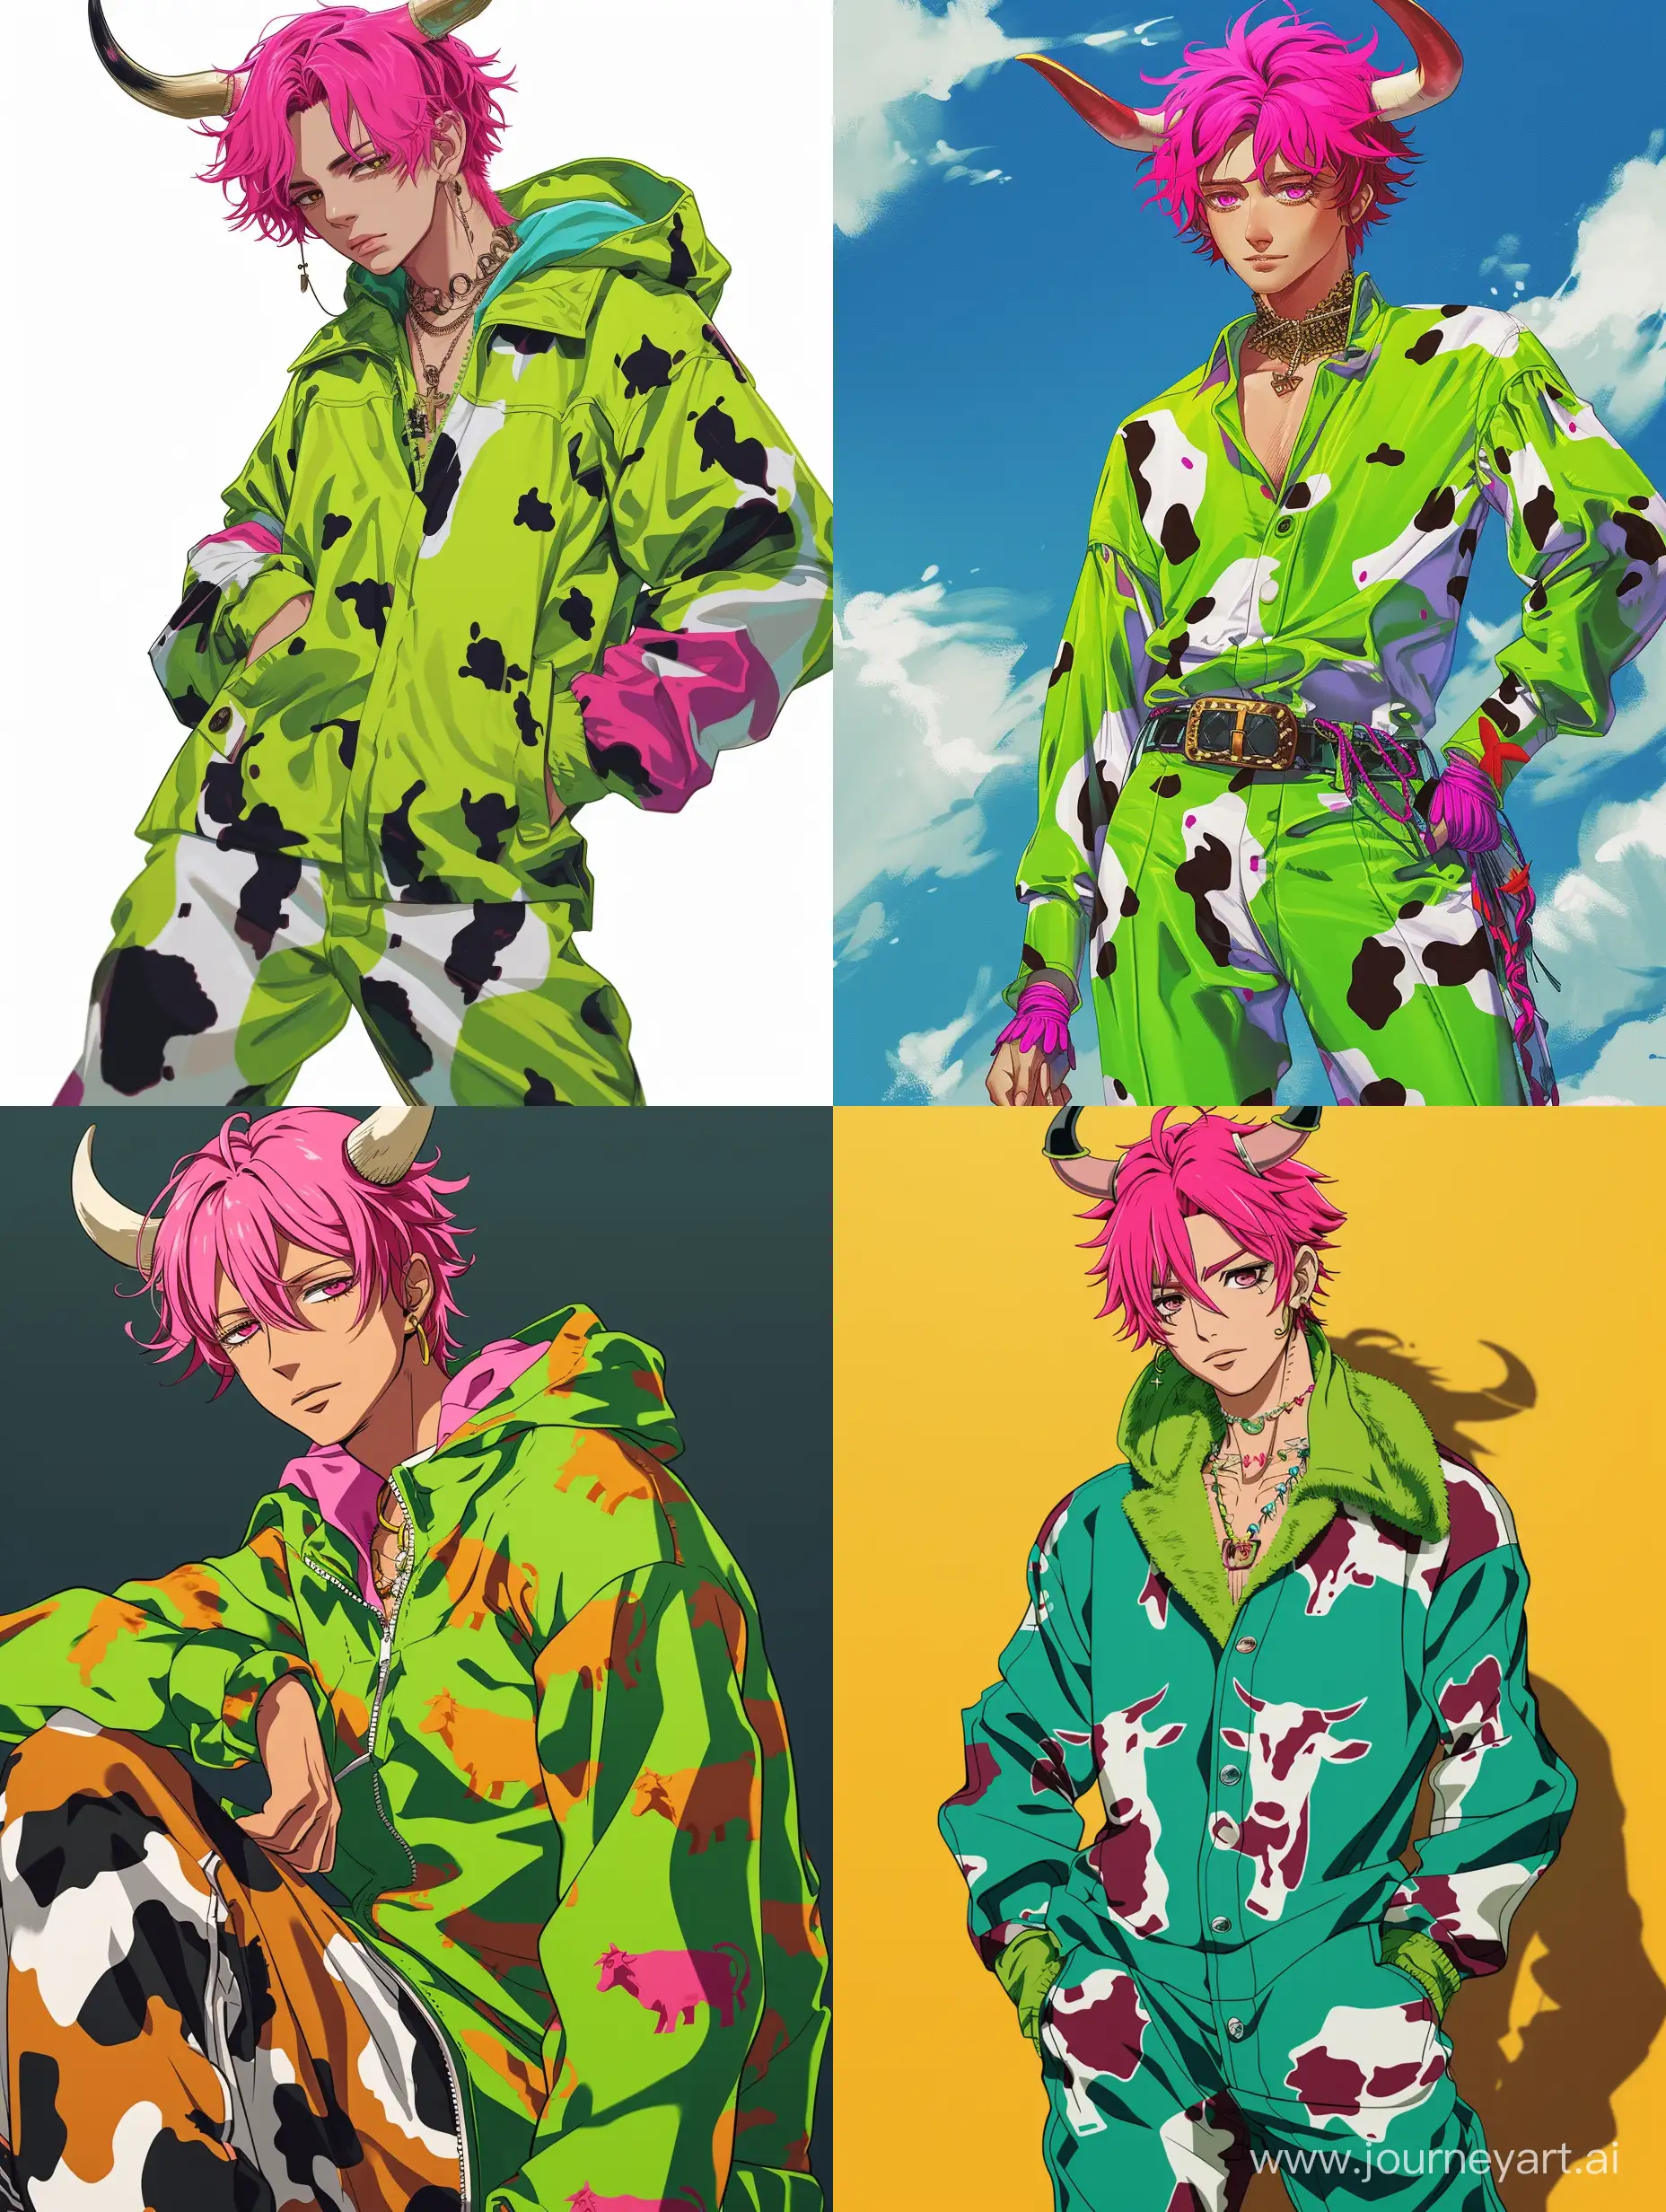 Anime-Guy-with-Vibrant-Green-Palette-Pink-Hair-and-Cow-Print-Clothing